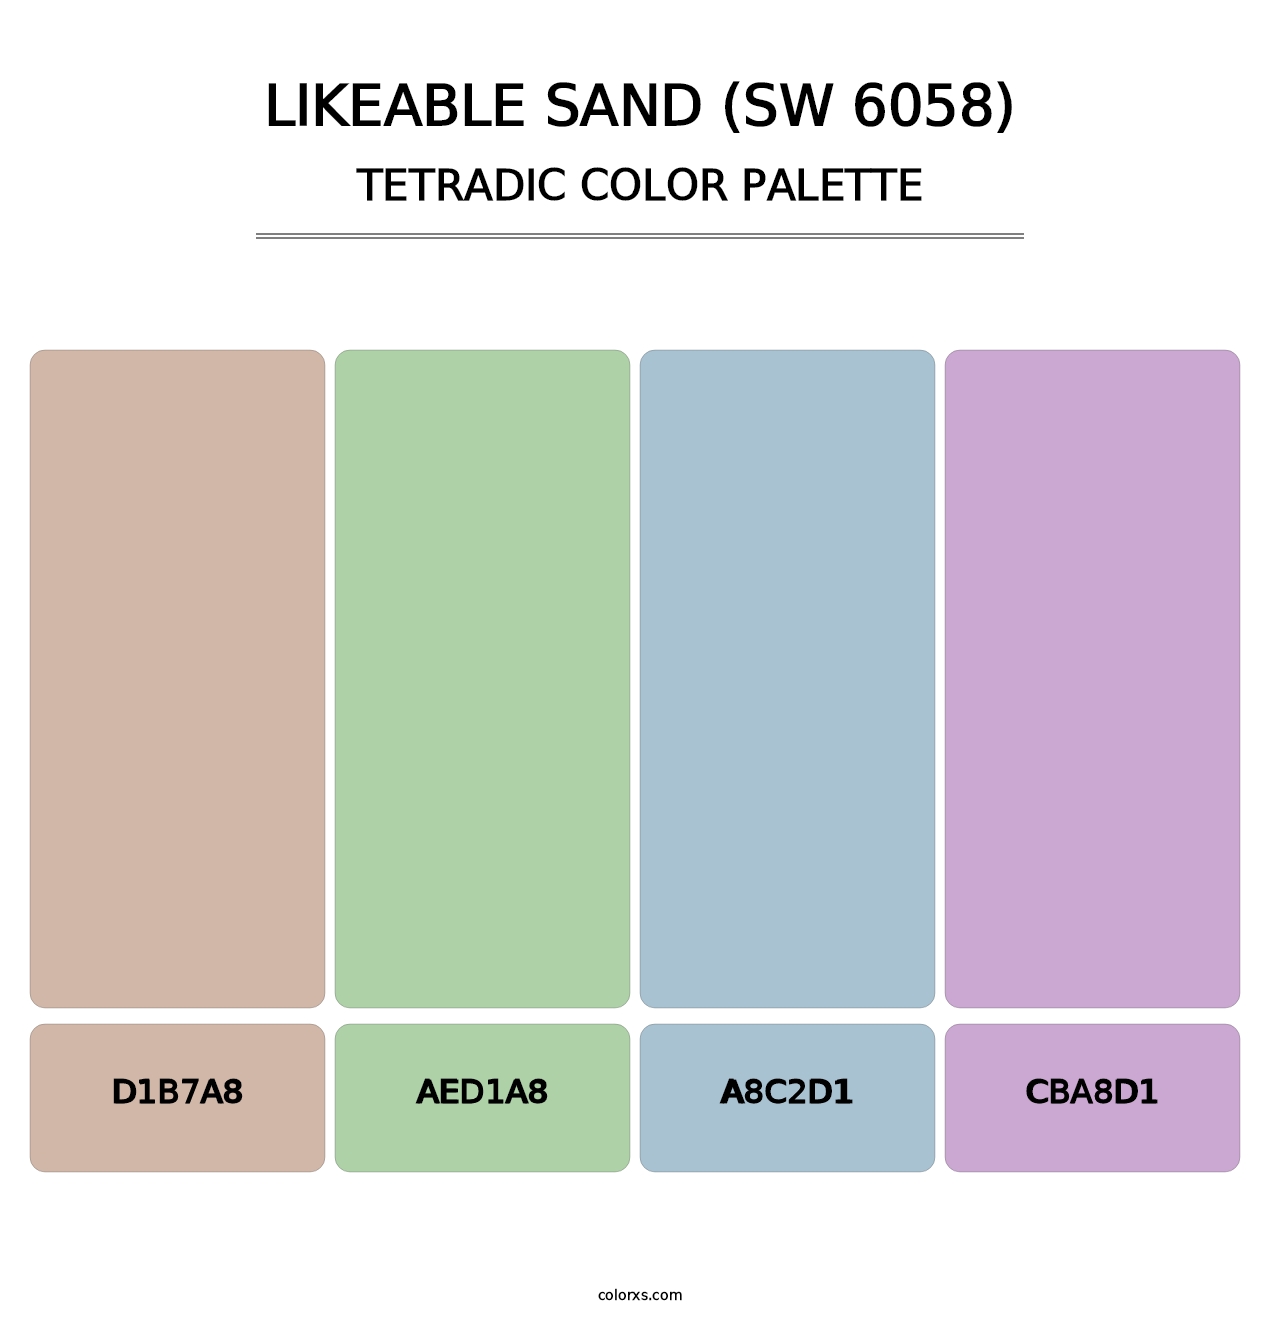 Likeable Sand (SW 6058) - Tetradic Color Palette